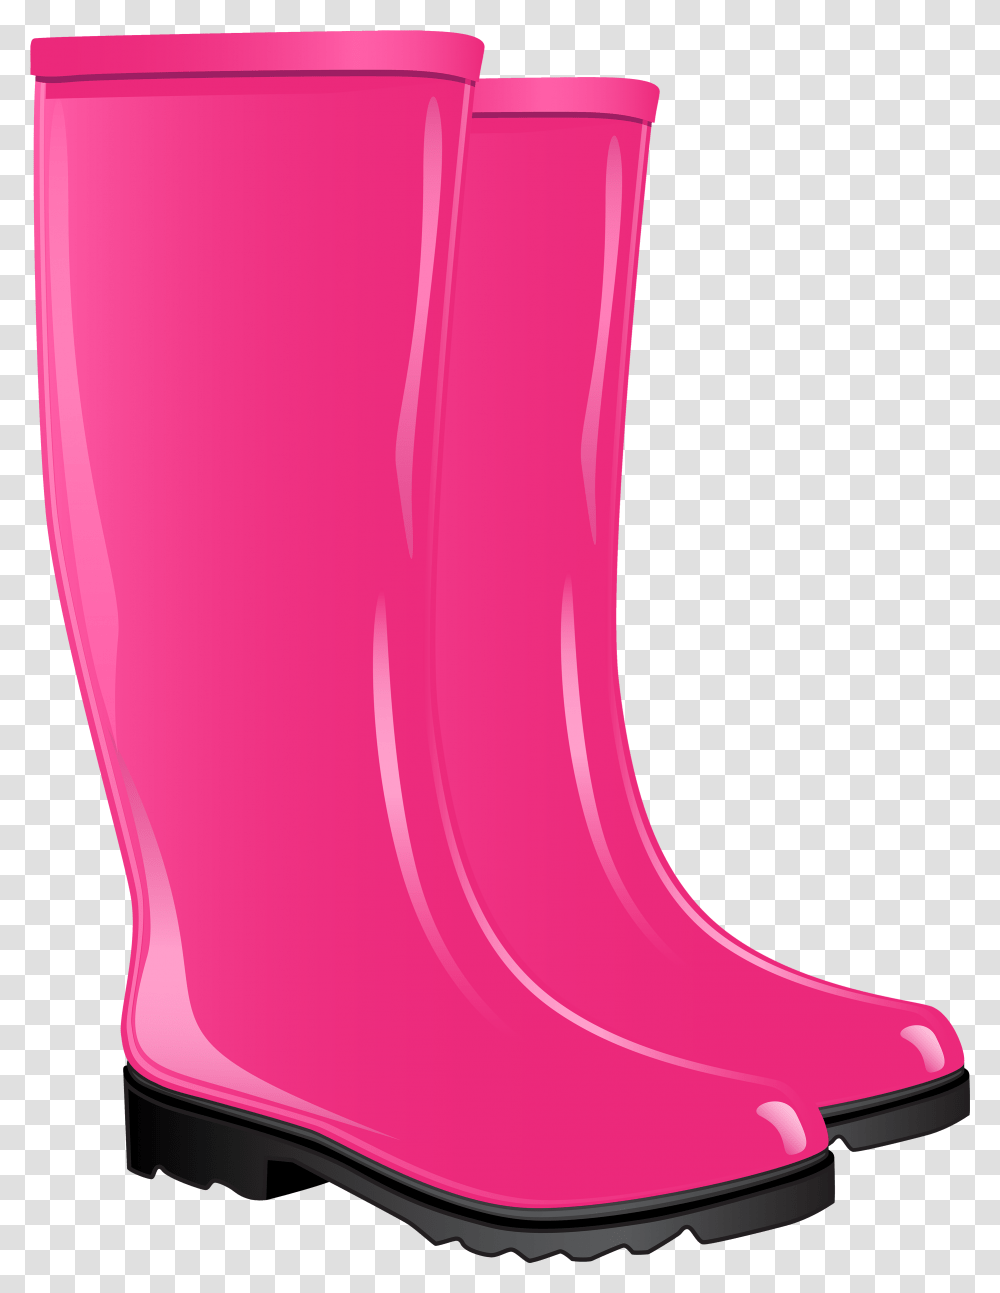 Freeuse Stock Boot Clipart Boot Timberland Wellington Boots Clipart Free, Apparel, Footwear, Riding Boot Transparent Png